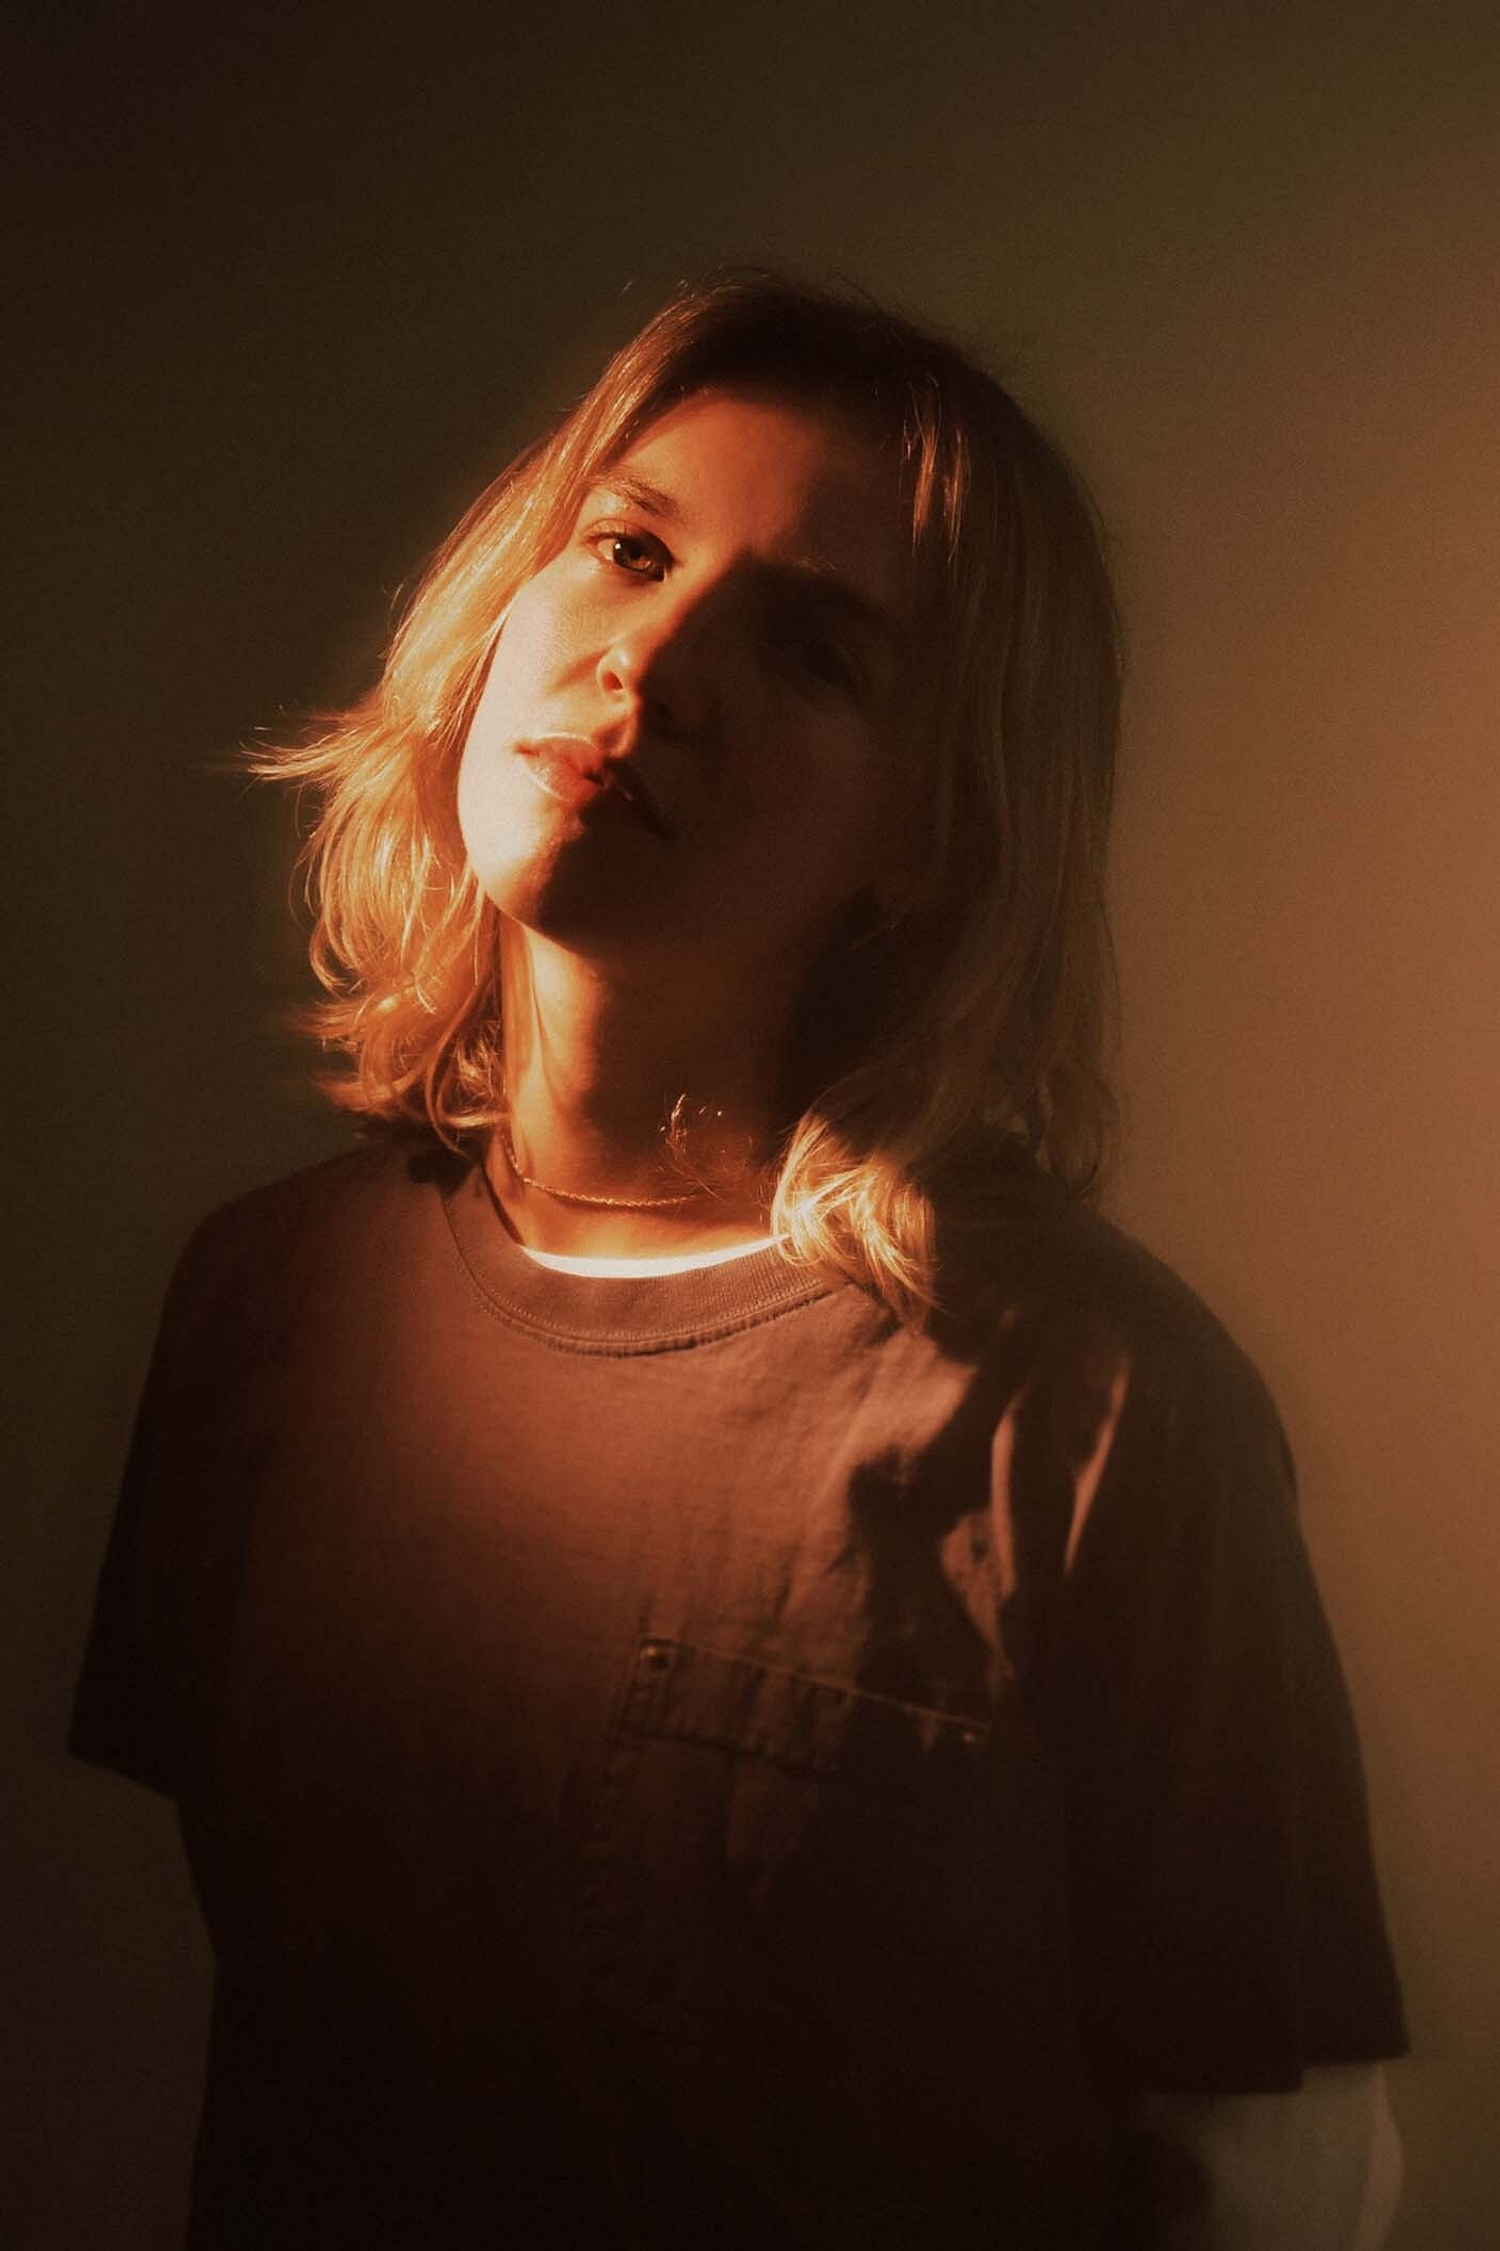 The Japanese House: Breaking the Circle